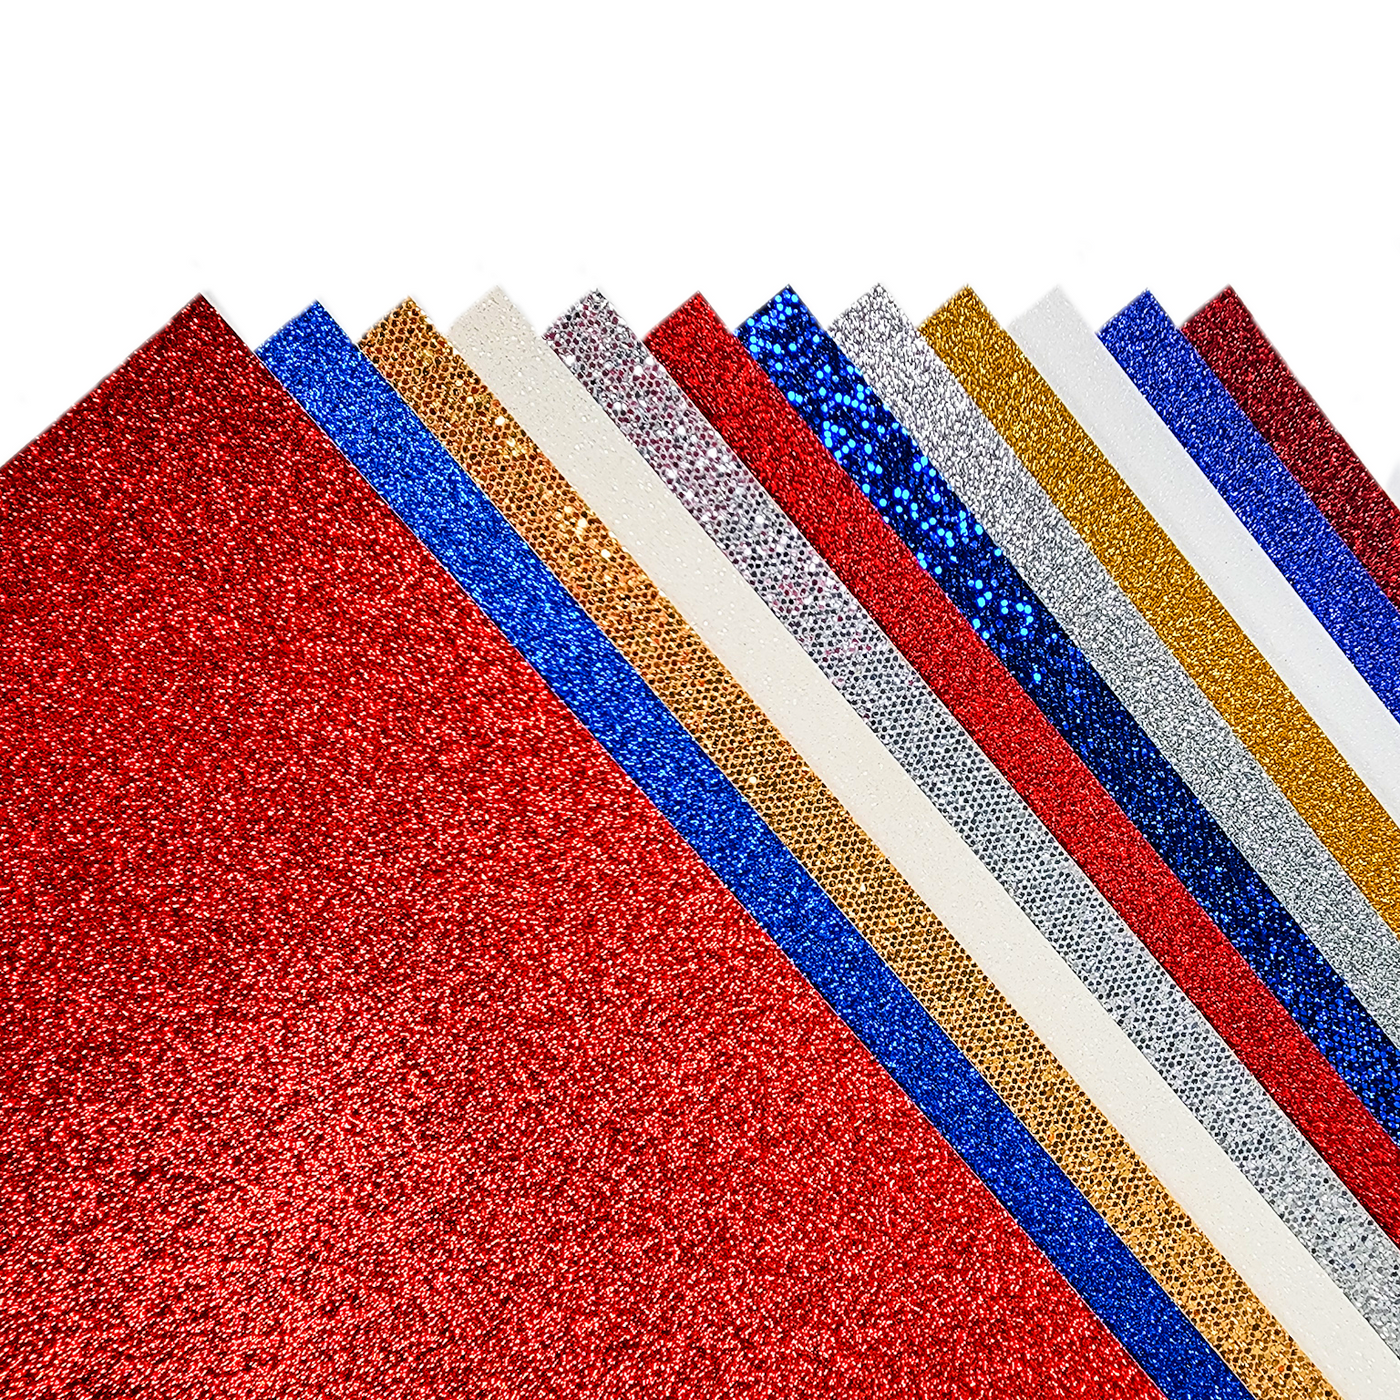 Enhance your 4th of July crafts with our GOD BLESS AMERICA GLITTER CARDSTOCK VARIETY PACK - 12 Sheets from Encore. This pack includes vibrant traditional glitter cardstock and sequin glitter cardstock in festive colors. Perfect for adding sparkle and shine to your holiday projects.